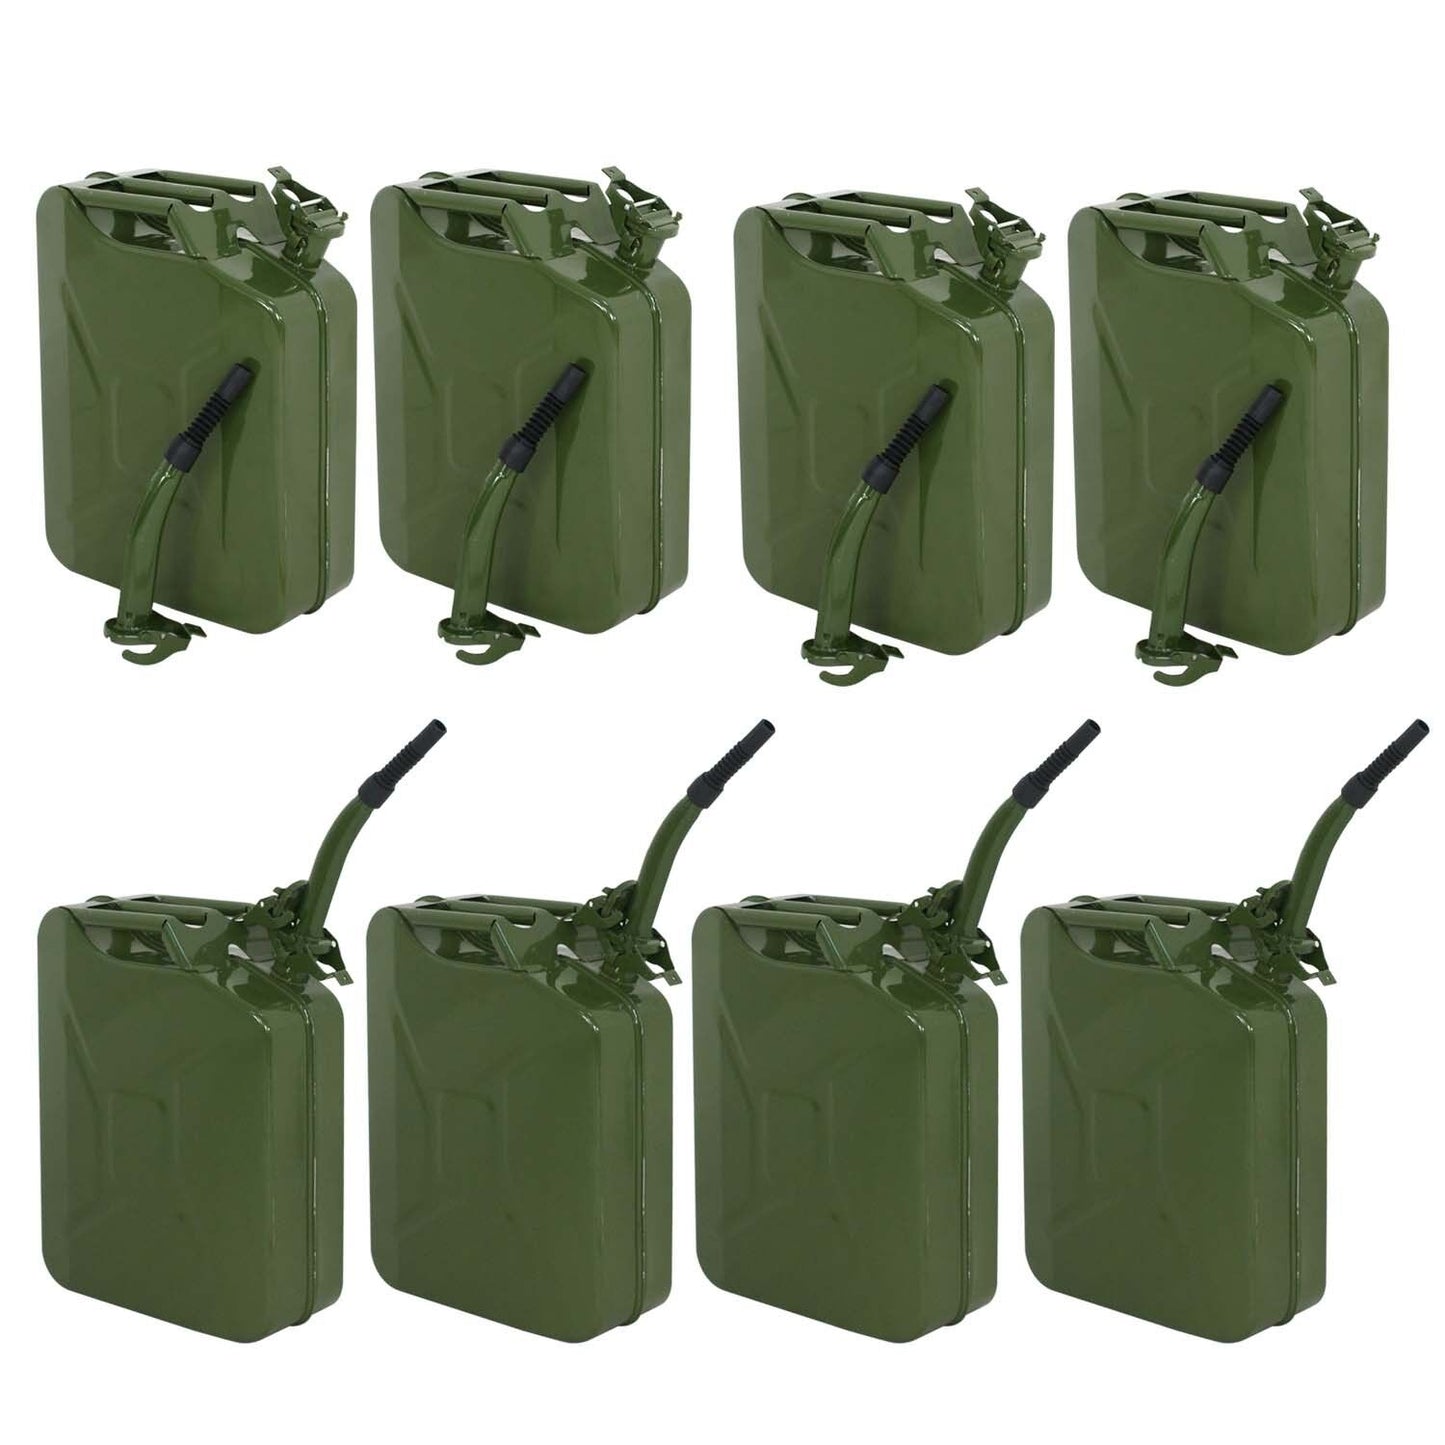 8PCS Jerry Can Green 20L 5 Gallon Backup Steel Tank Gas Gasoline Military Green